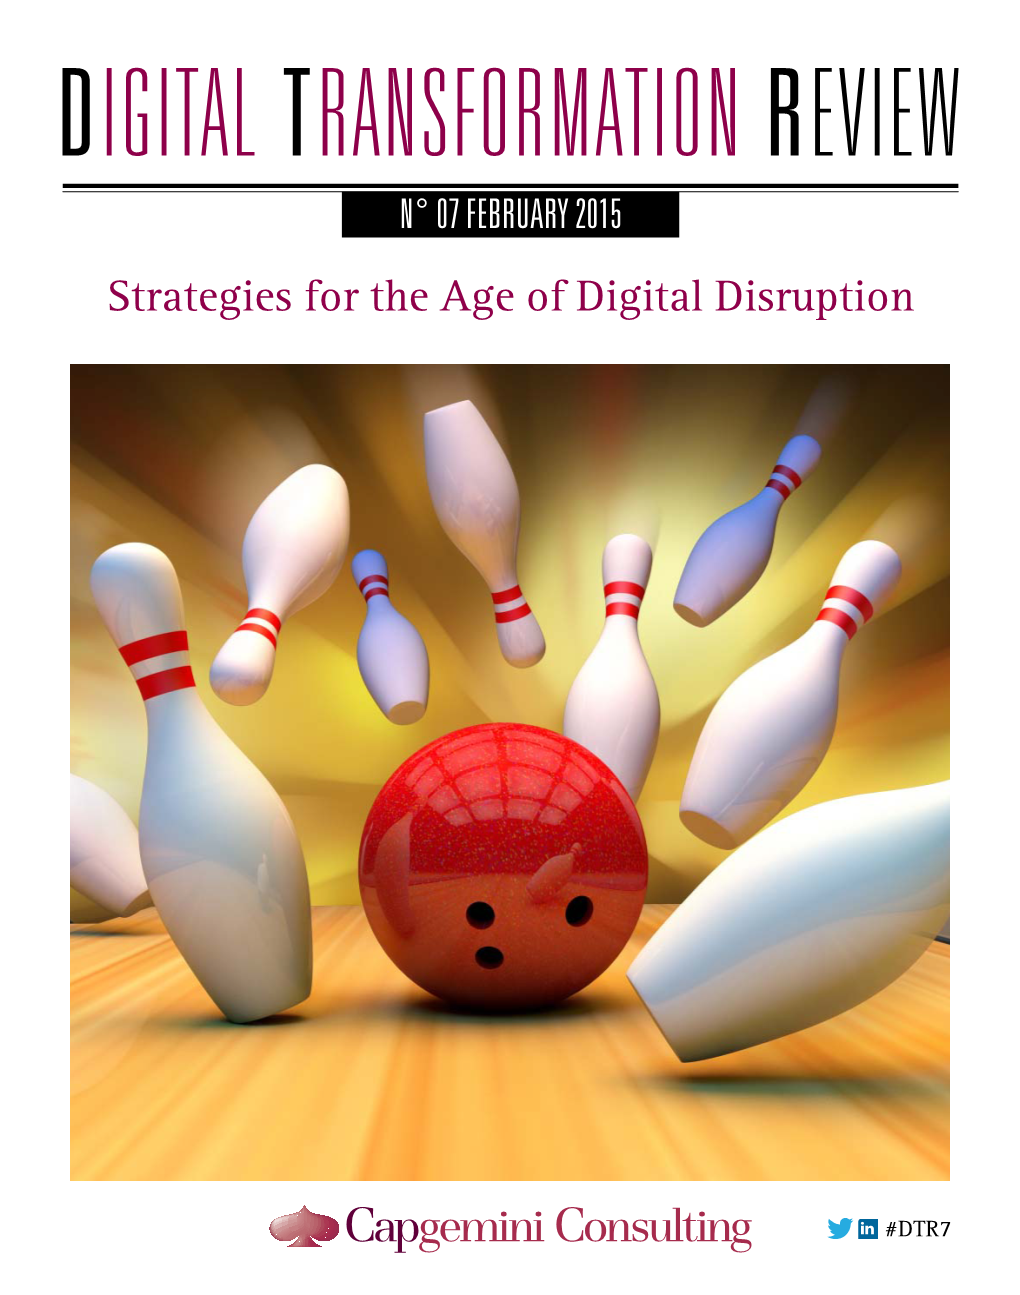 Strategies for the Age of Digital Disruption